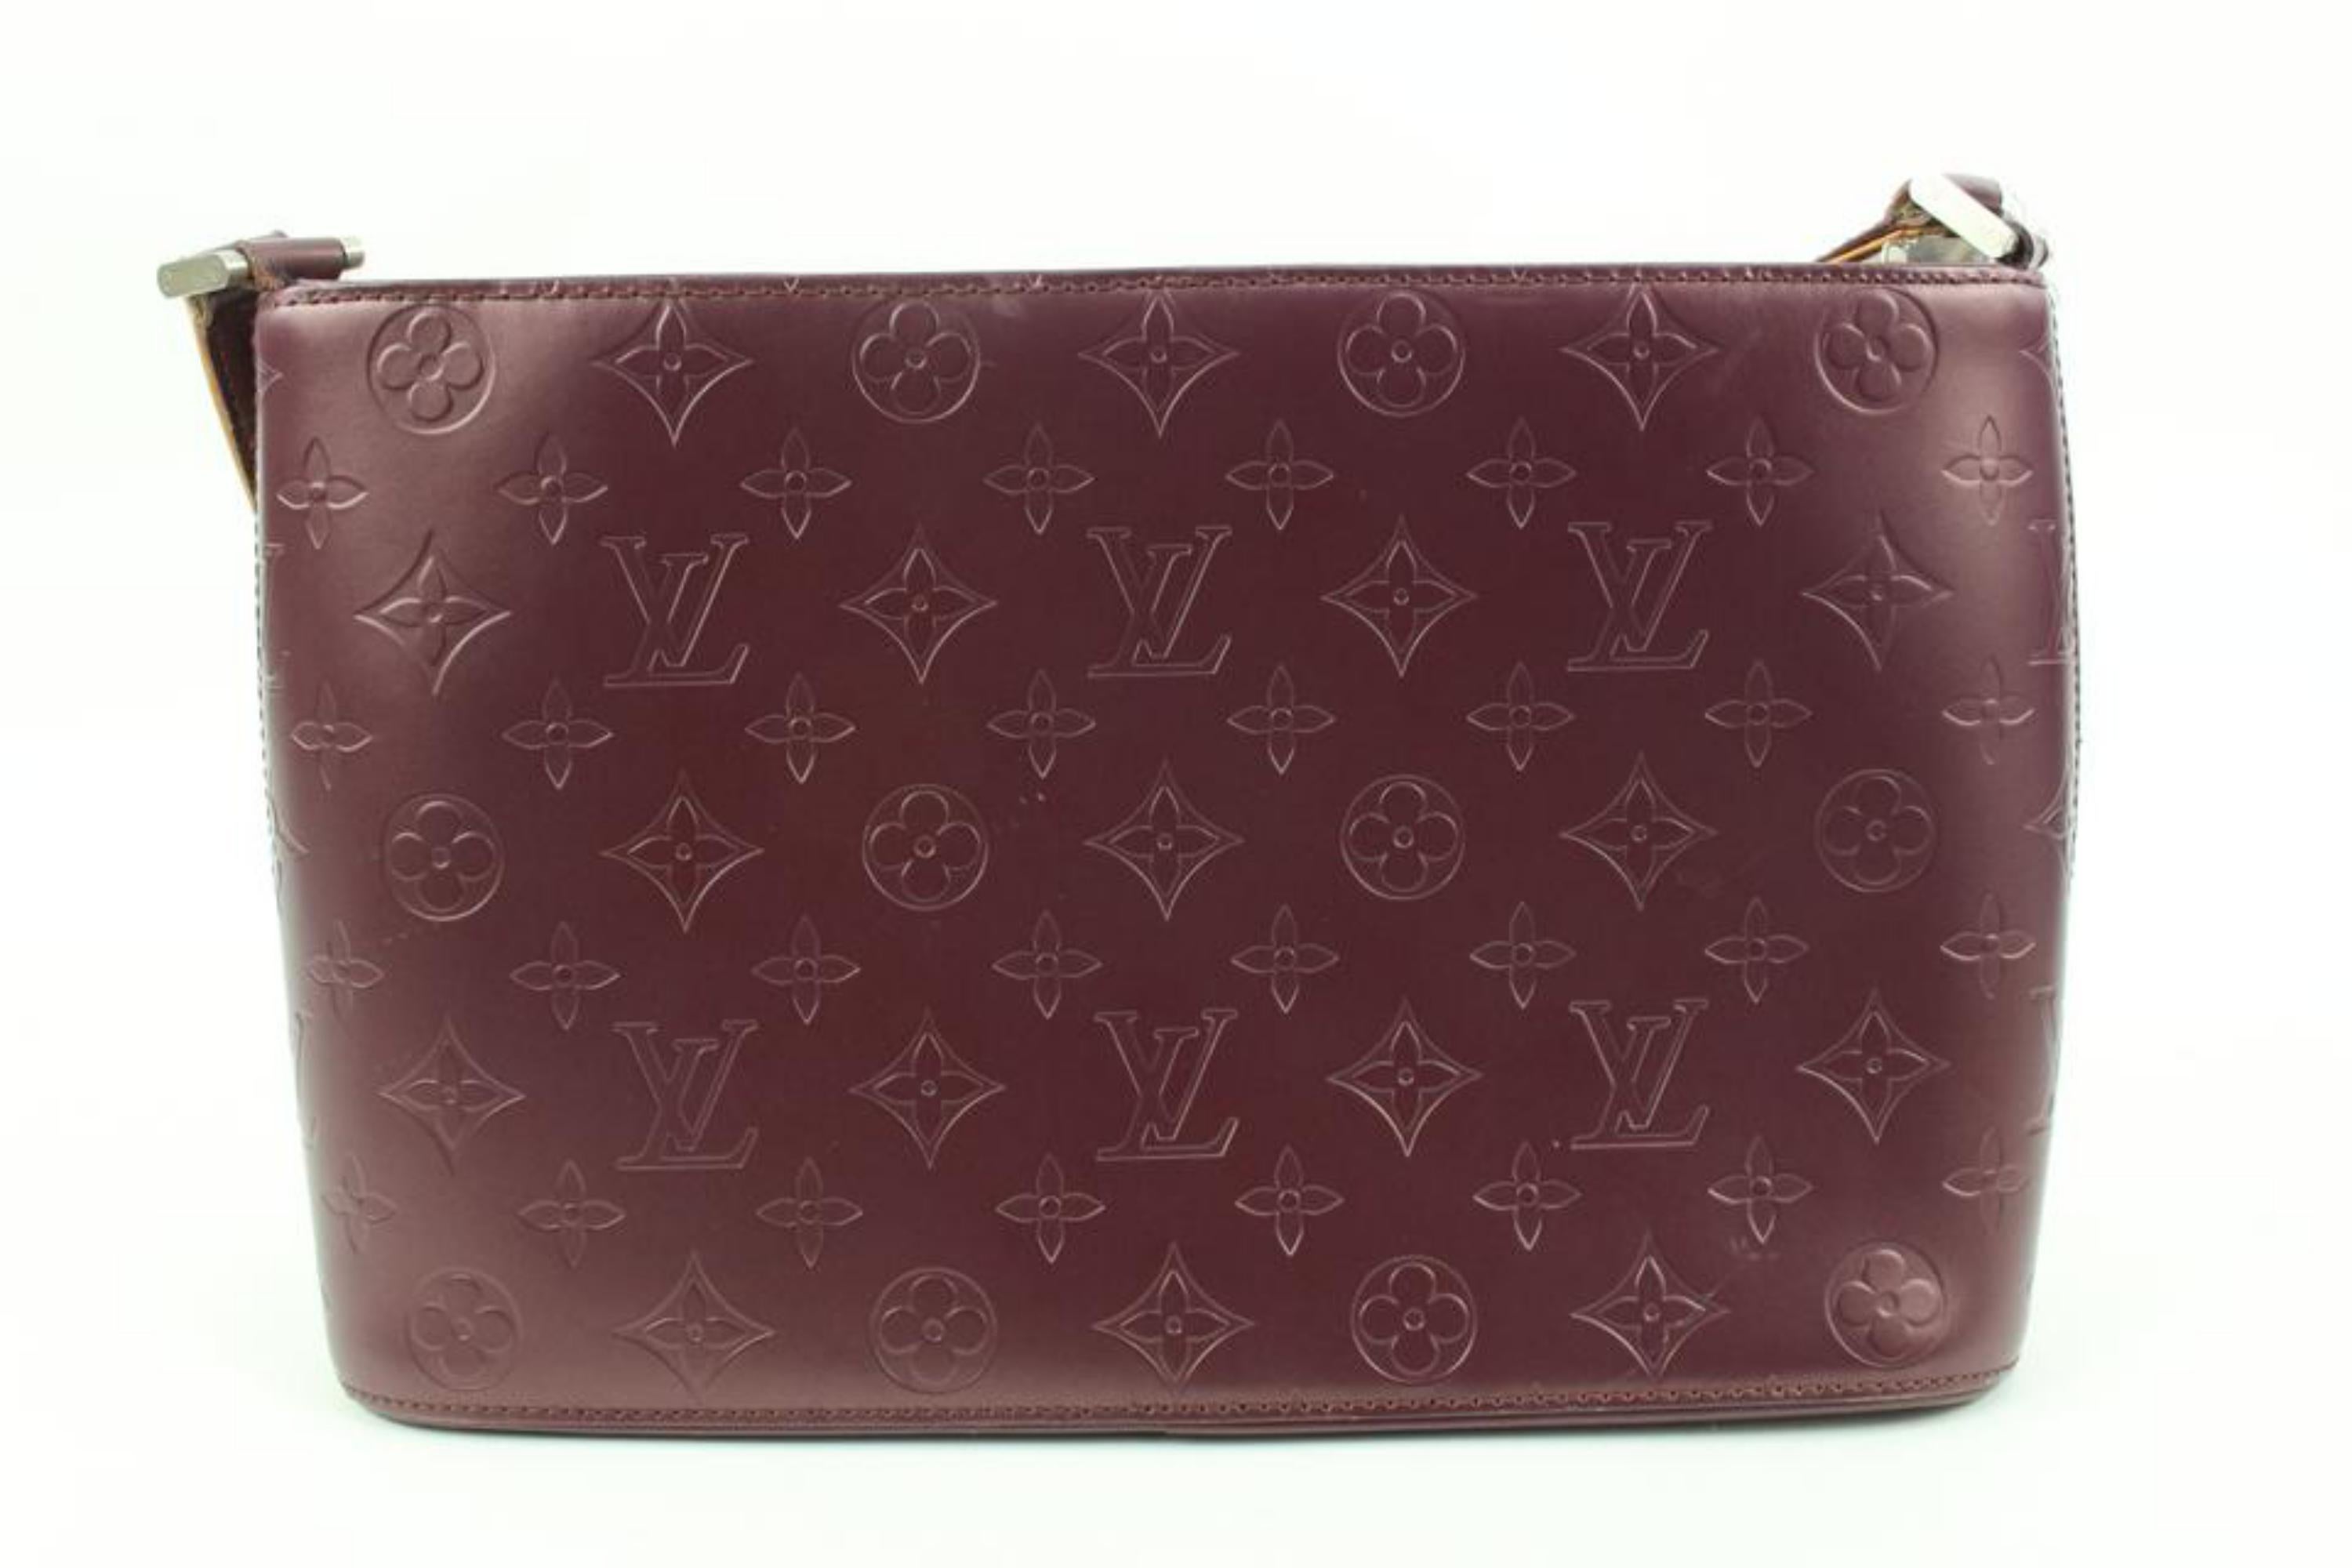 Louis Vuitton Burgundy Monogram Vernis Mat Allston Shoulder bag 80lv225s In Good Condition For Sale In Dix hills, NY